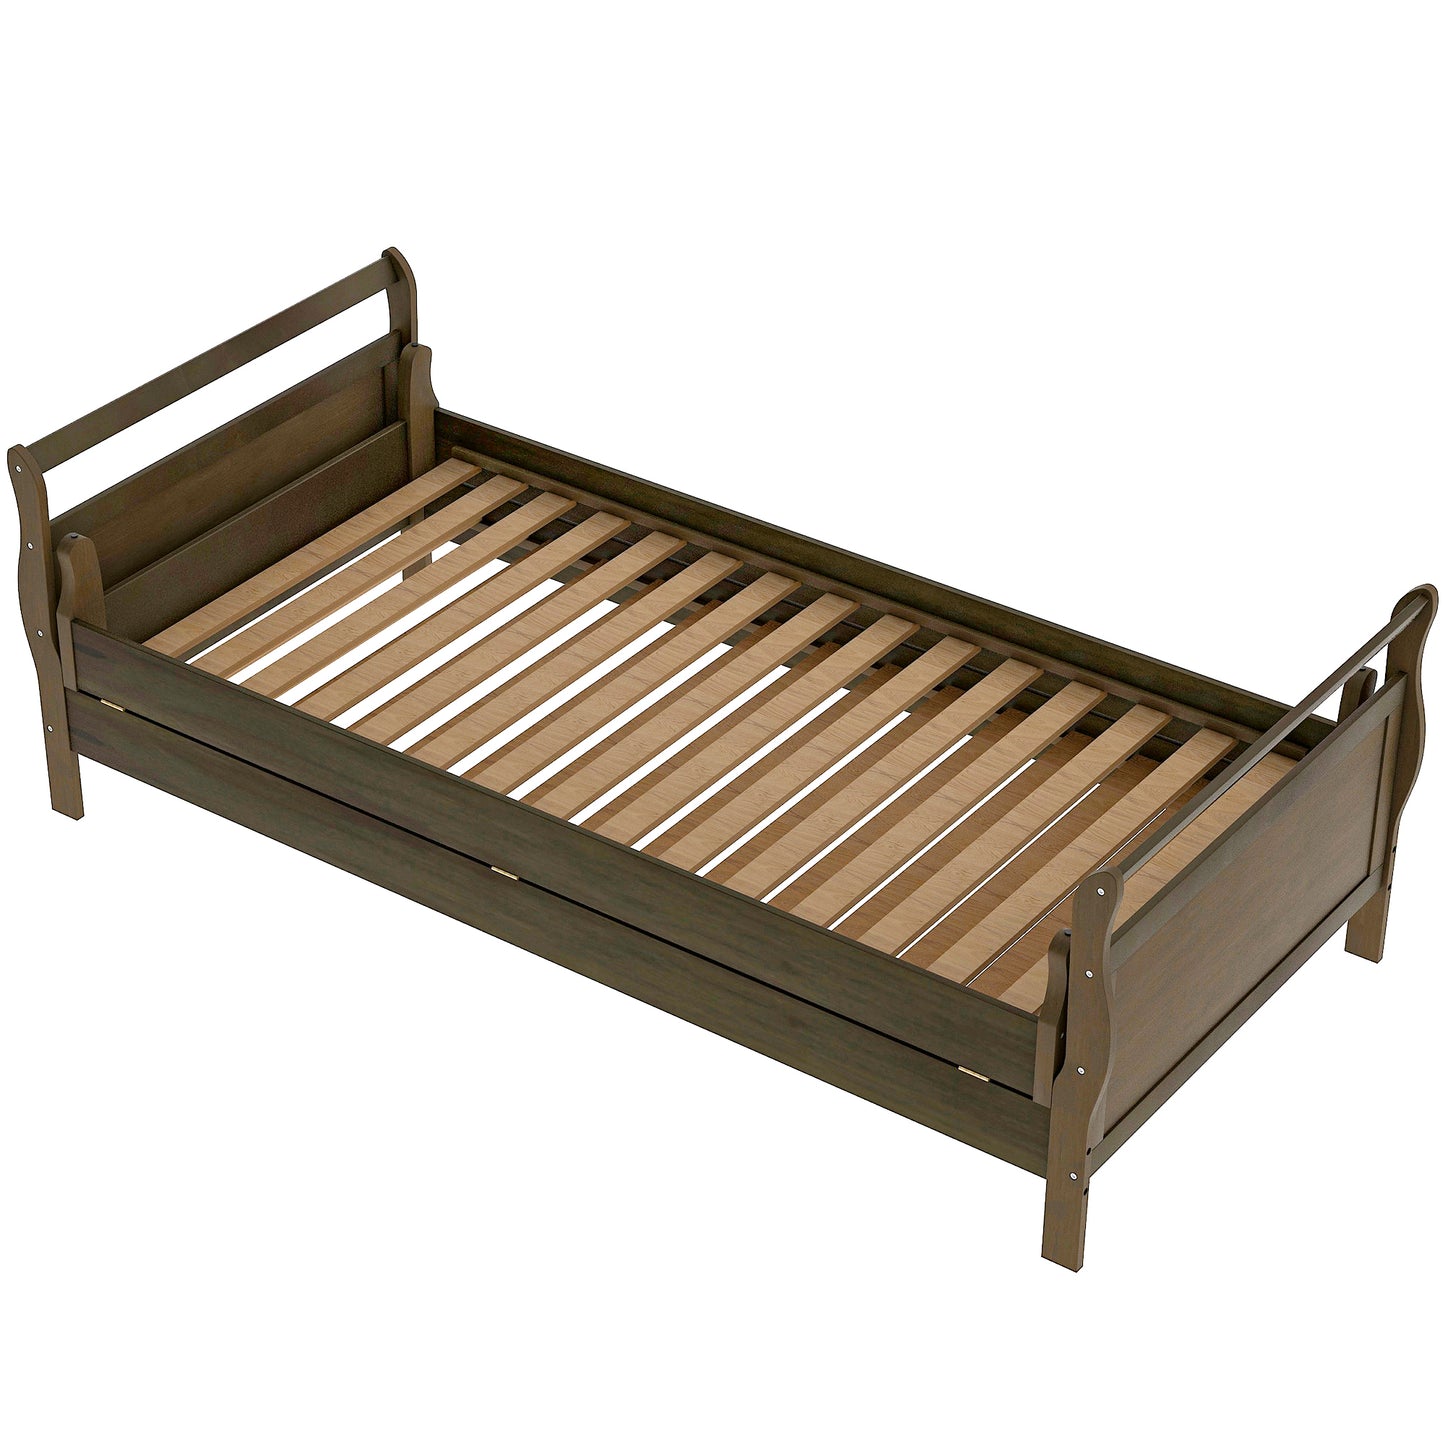 Classic Style Pine Wood Platform Bed